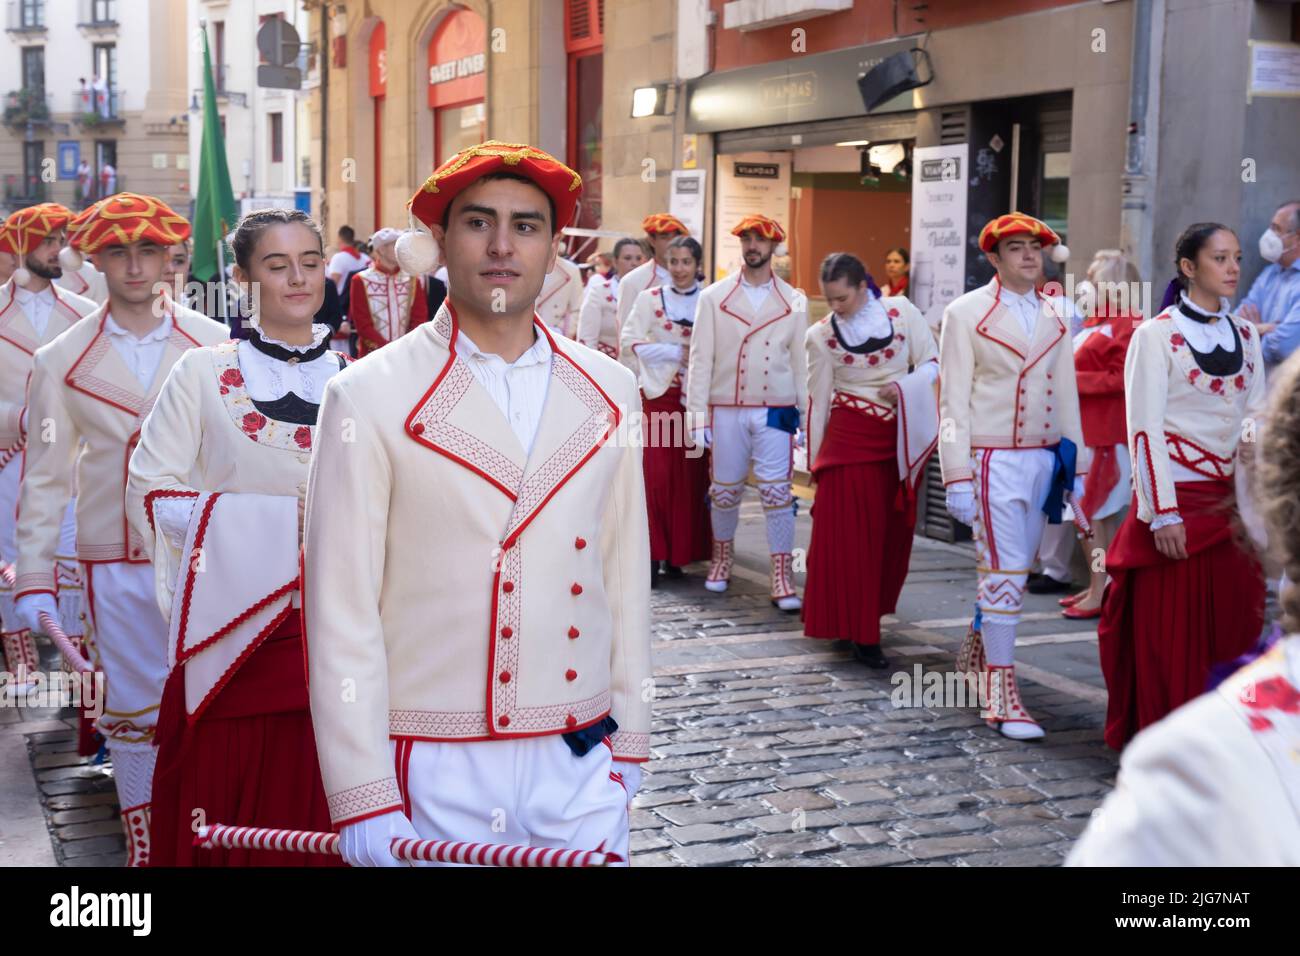 Young people in uniform in the traditional procession of the day of San Fermin. July 07 2022. Pamplona, Navarre, Spain, Europe Stock Photo